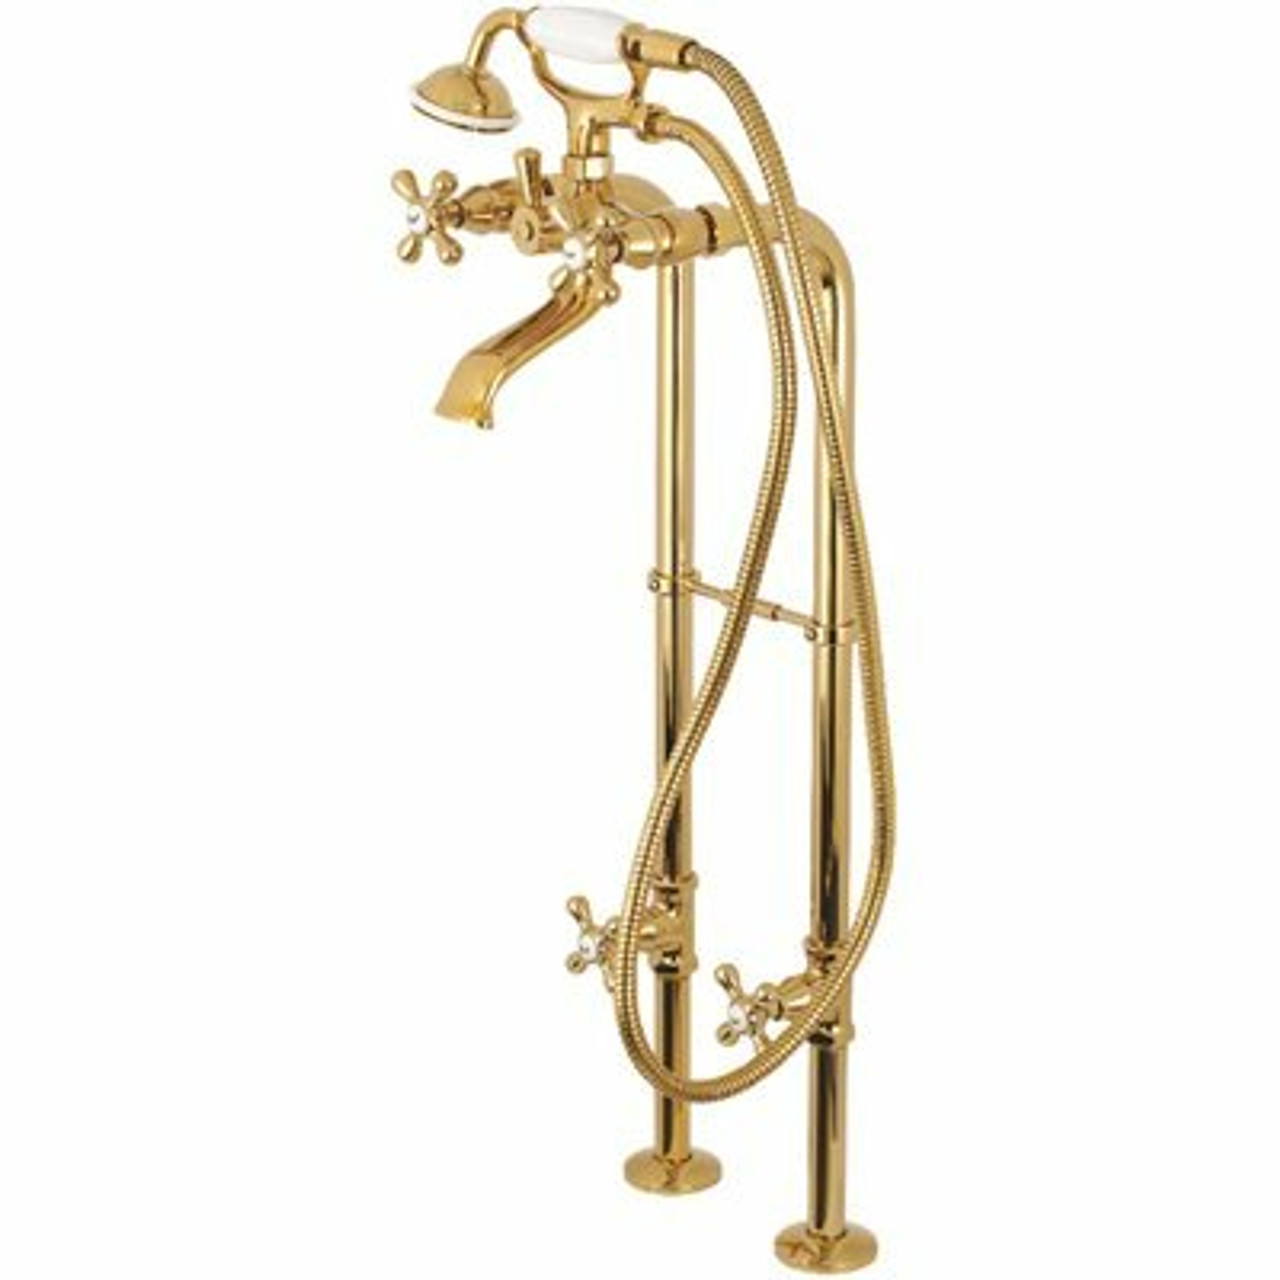 Kingston Brass Traditional 3-Handle Claw Foot Freestanding Tub Faucet With Handshower Combo Set In Polished Brass